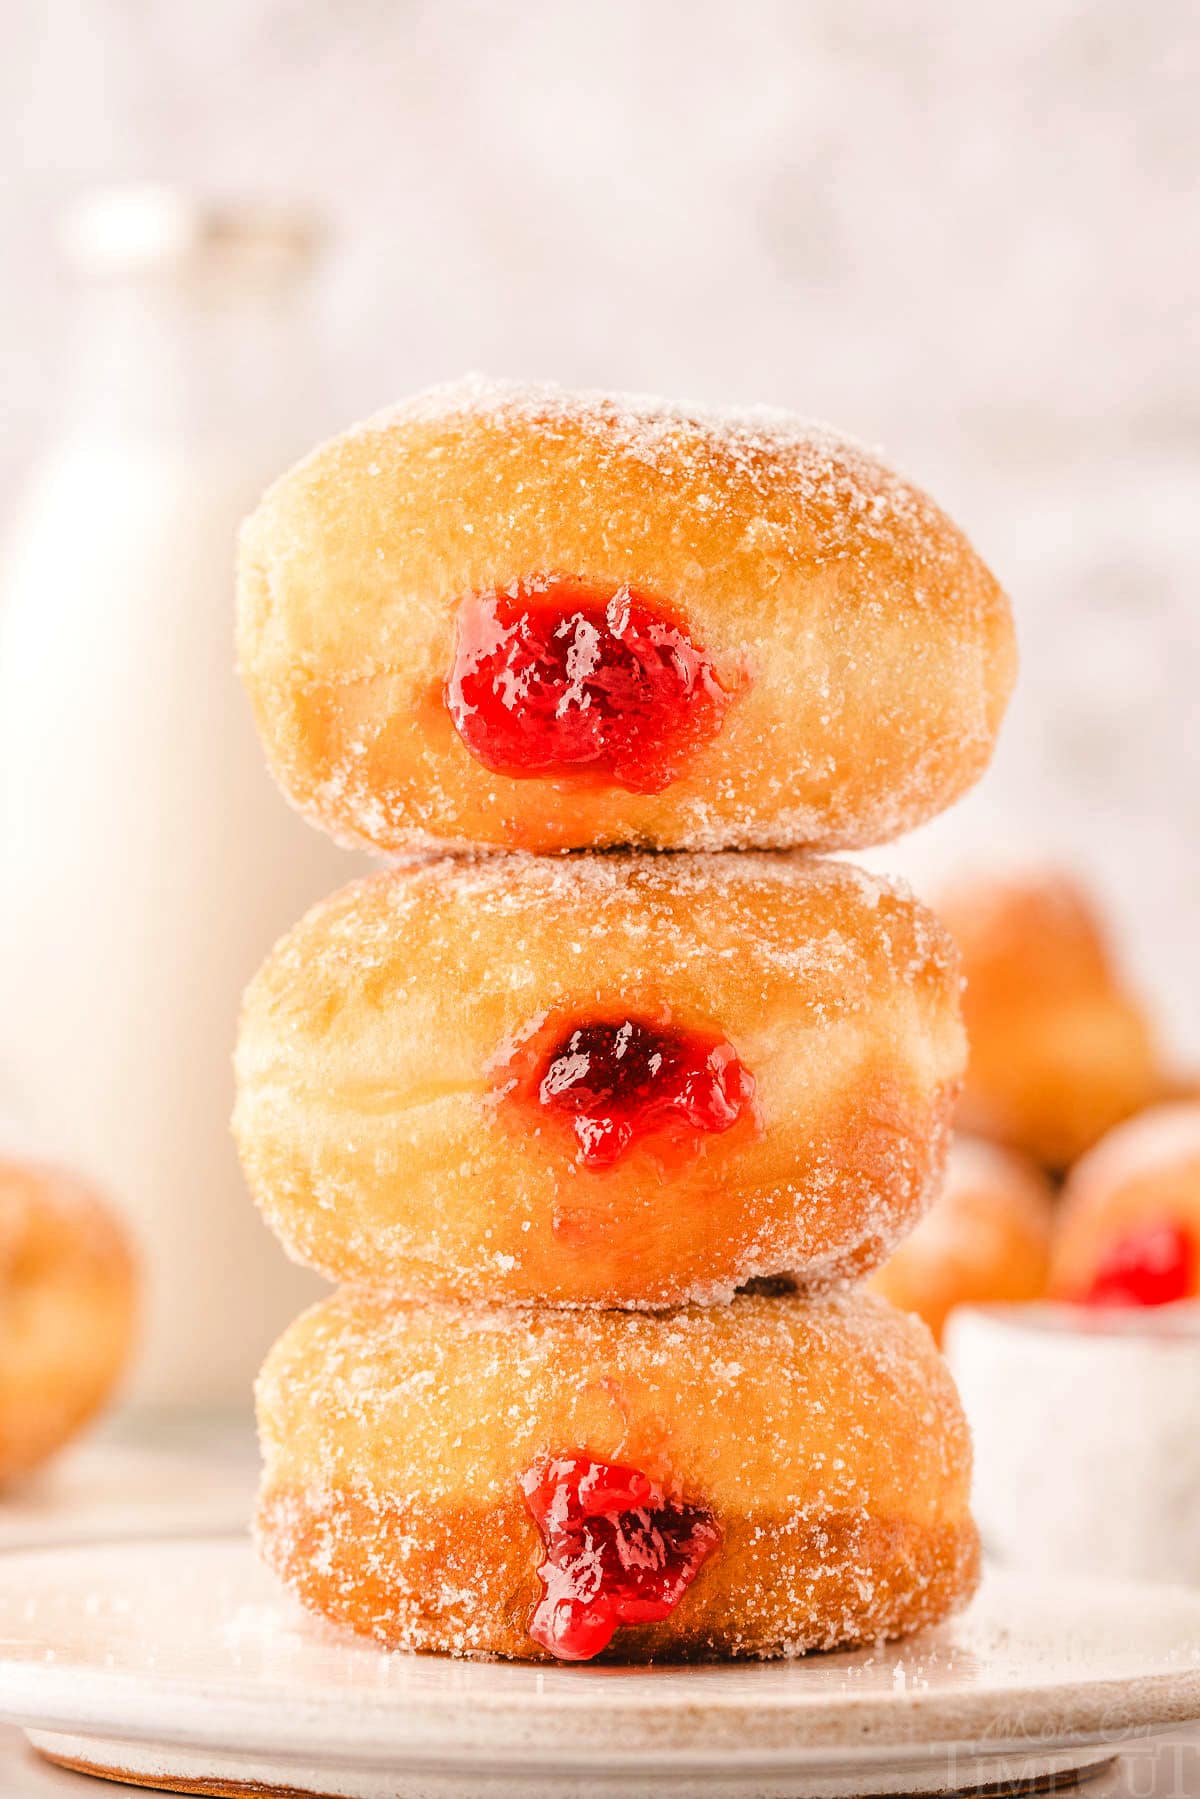 stack of three jelly donuts filled with raspberry jam. more donuts can be seen in the background.